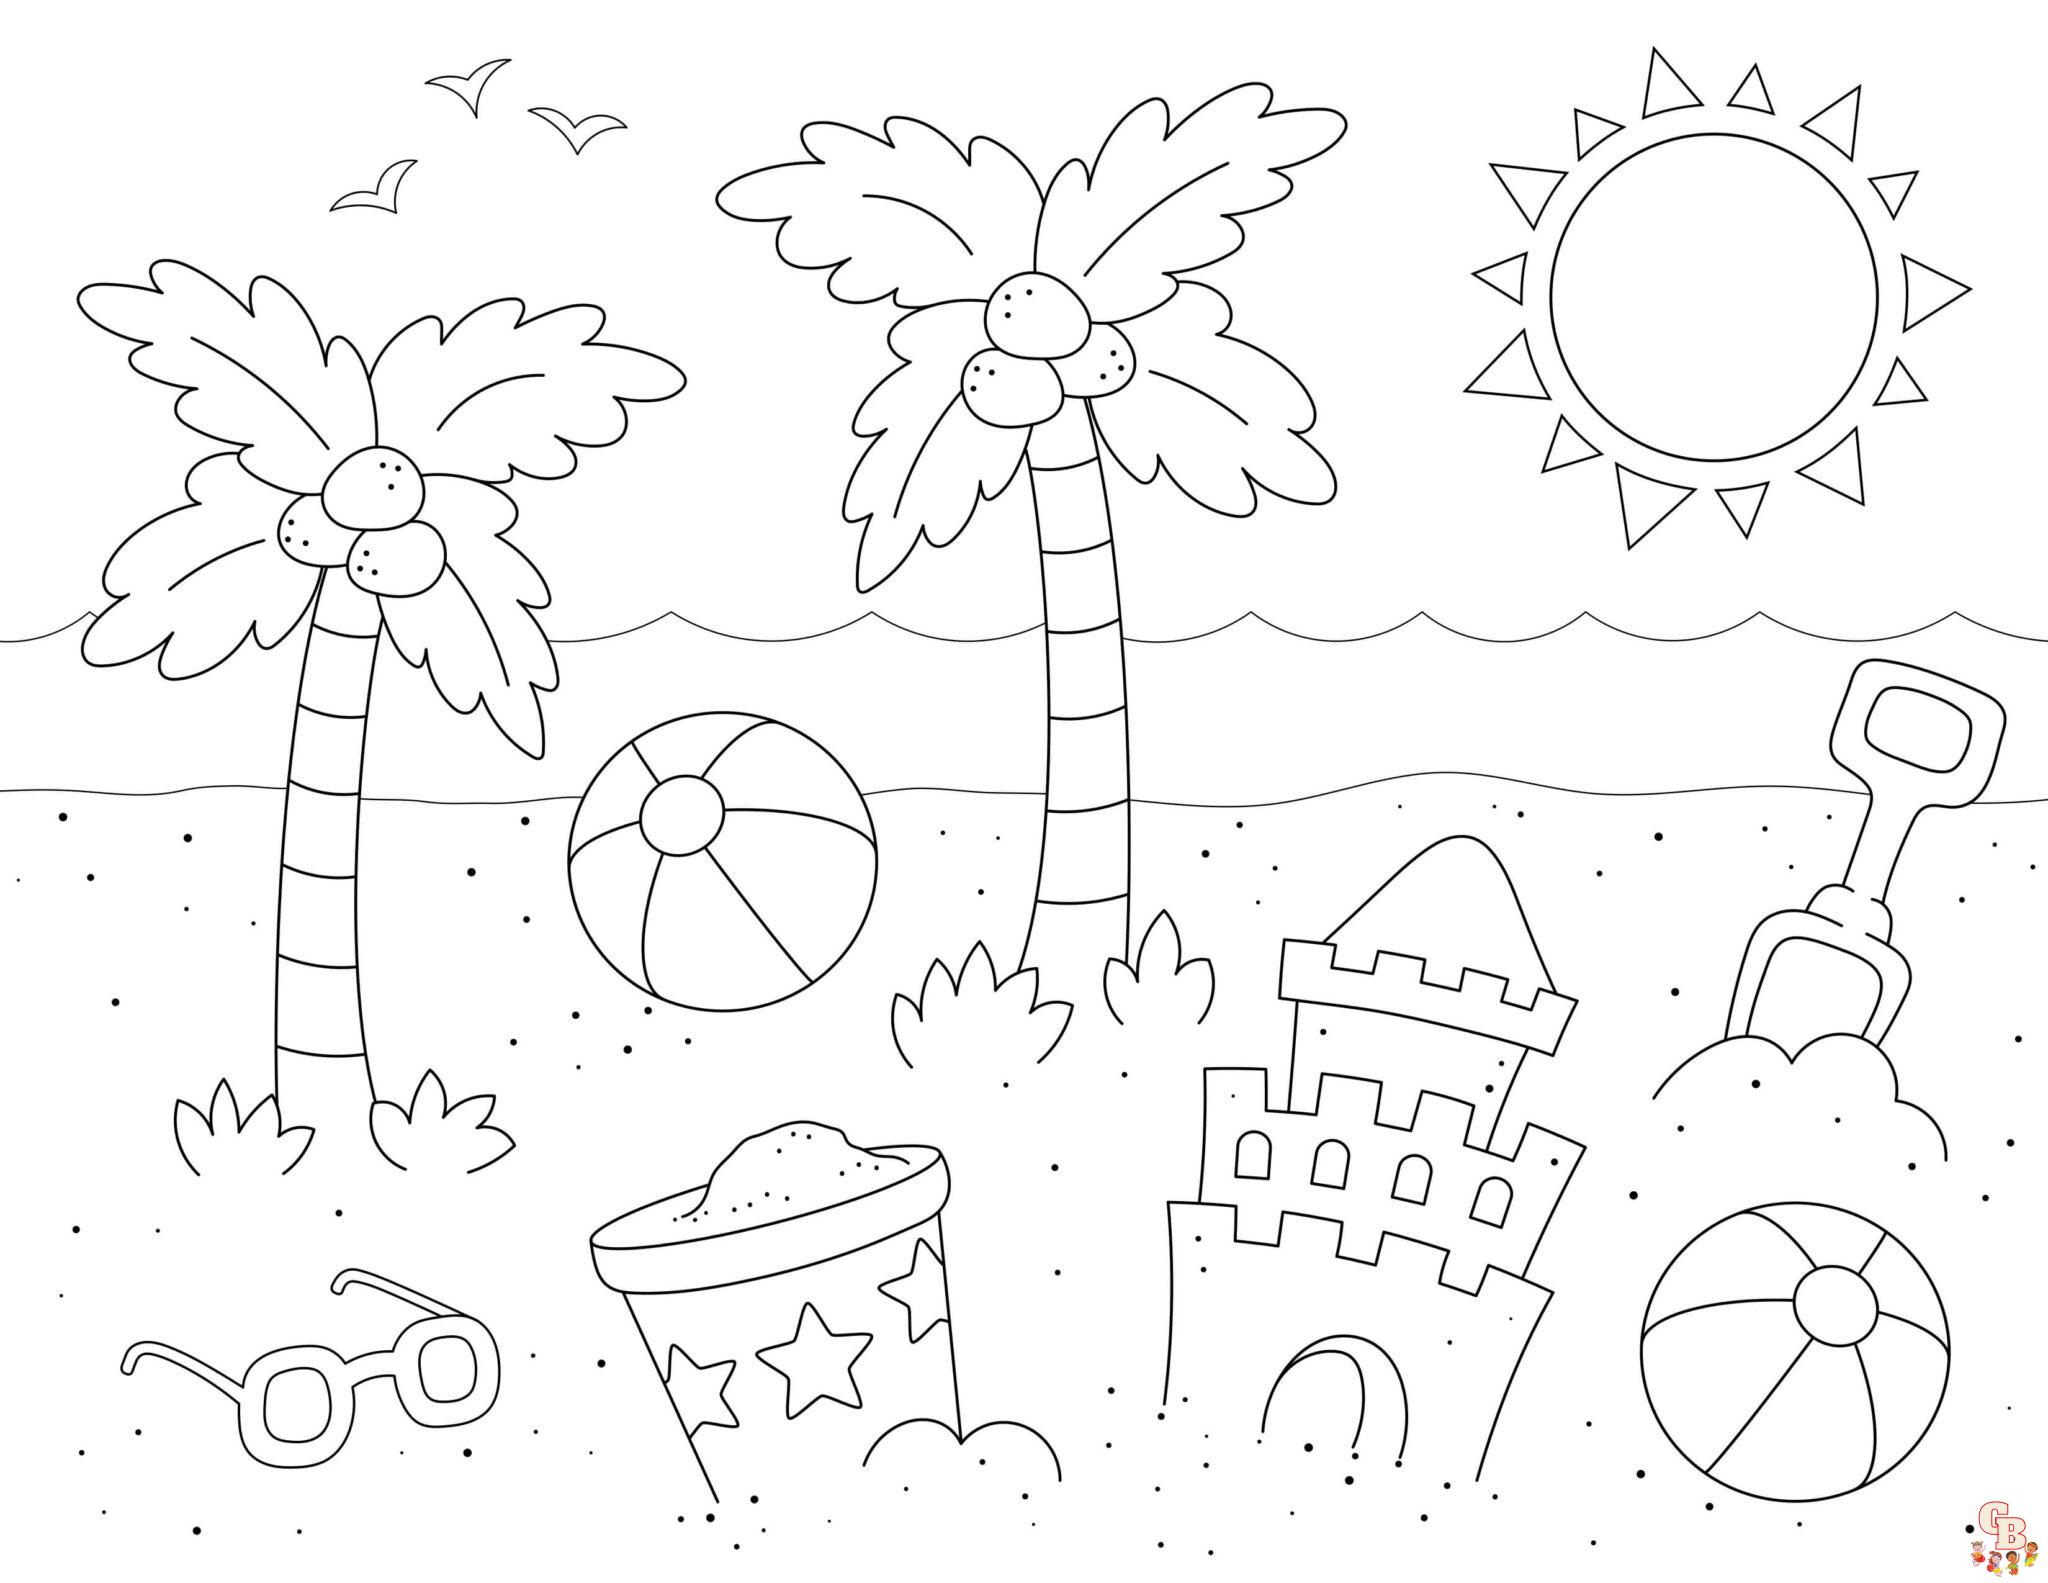 Palm tree coloring page